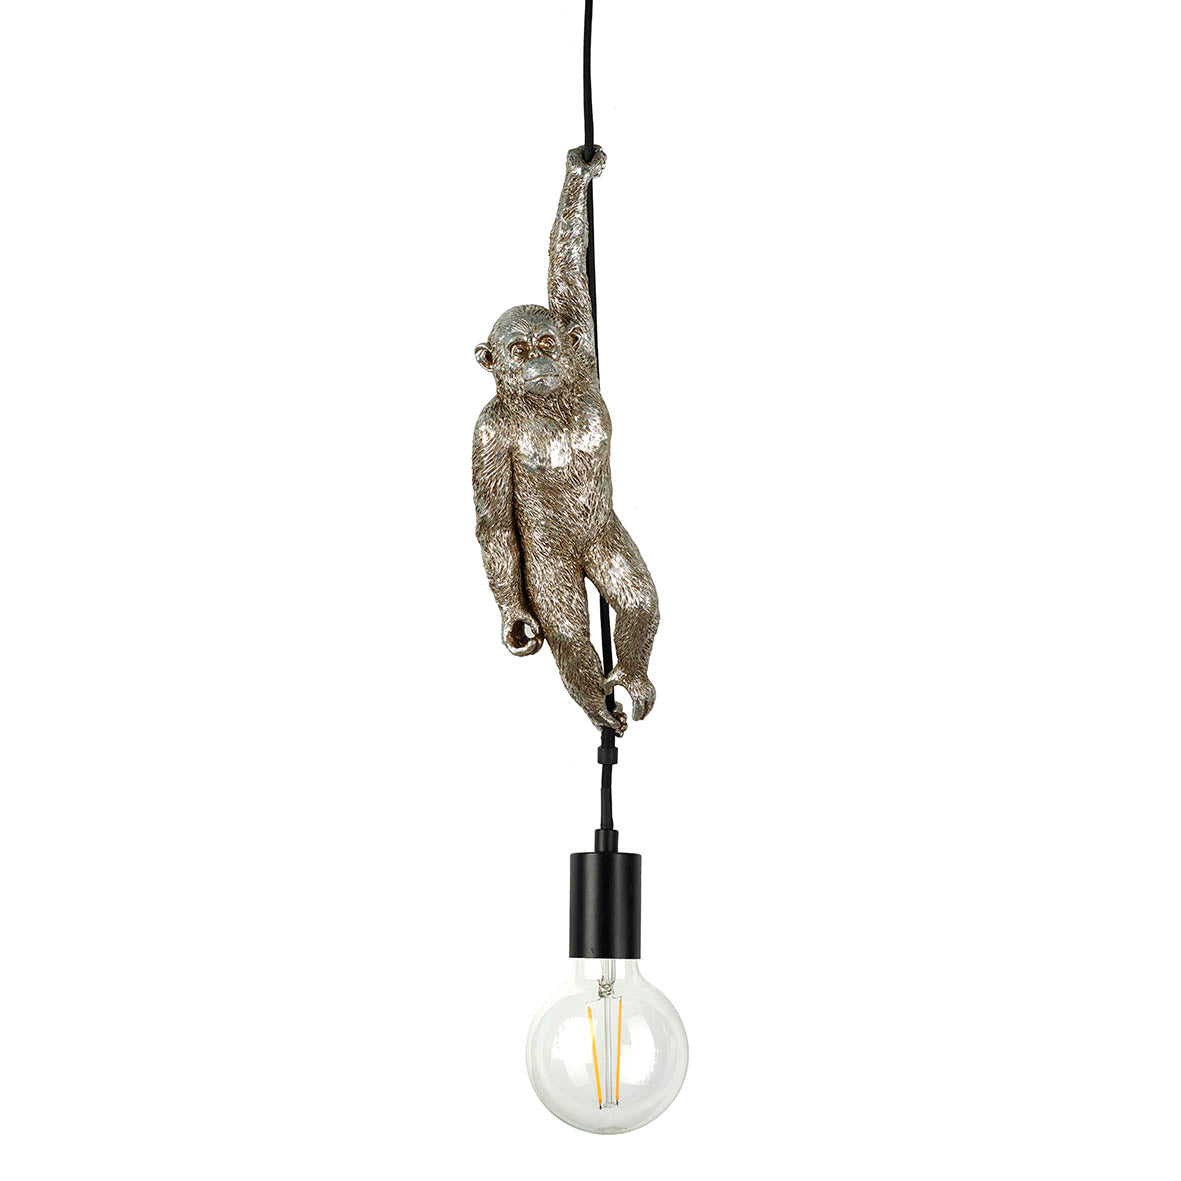 Monkeying Around Antique Silver Ceiling Light Pendant Featuring A Monkey Hanging From One Hand